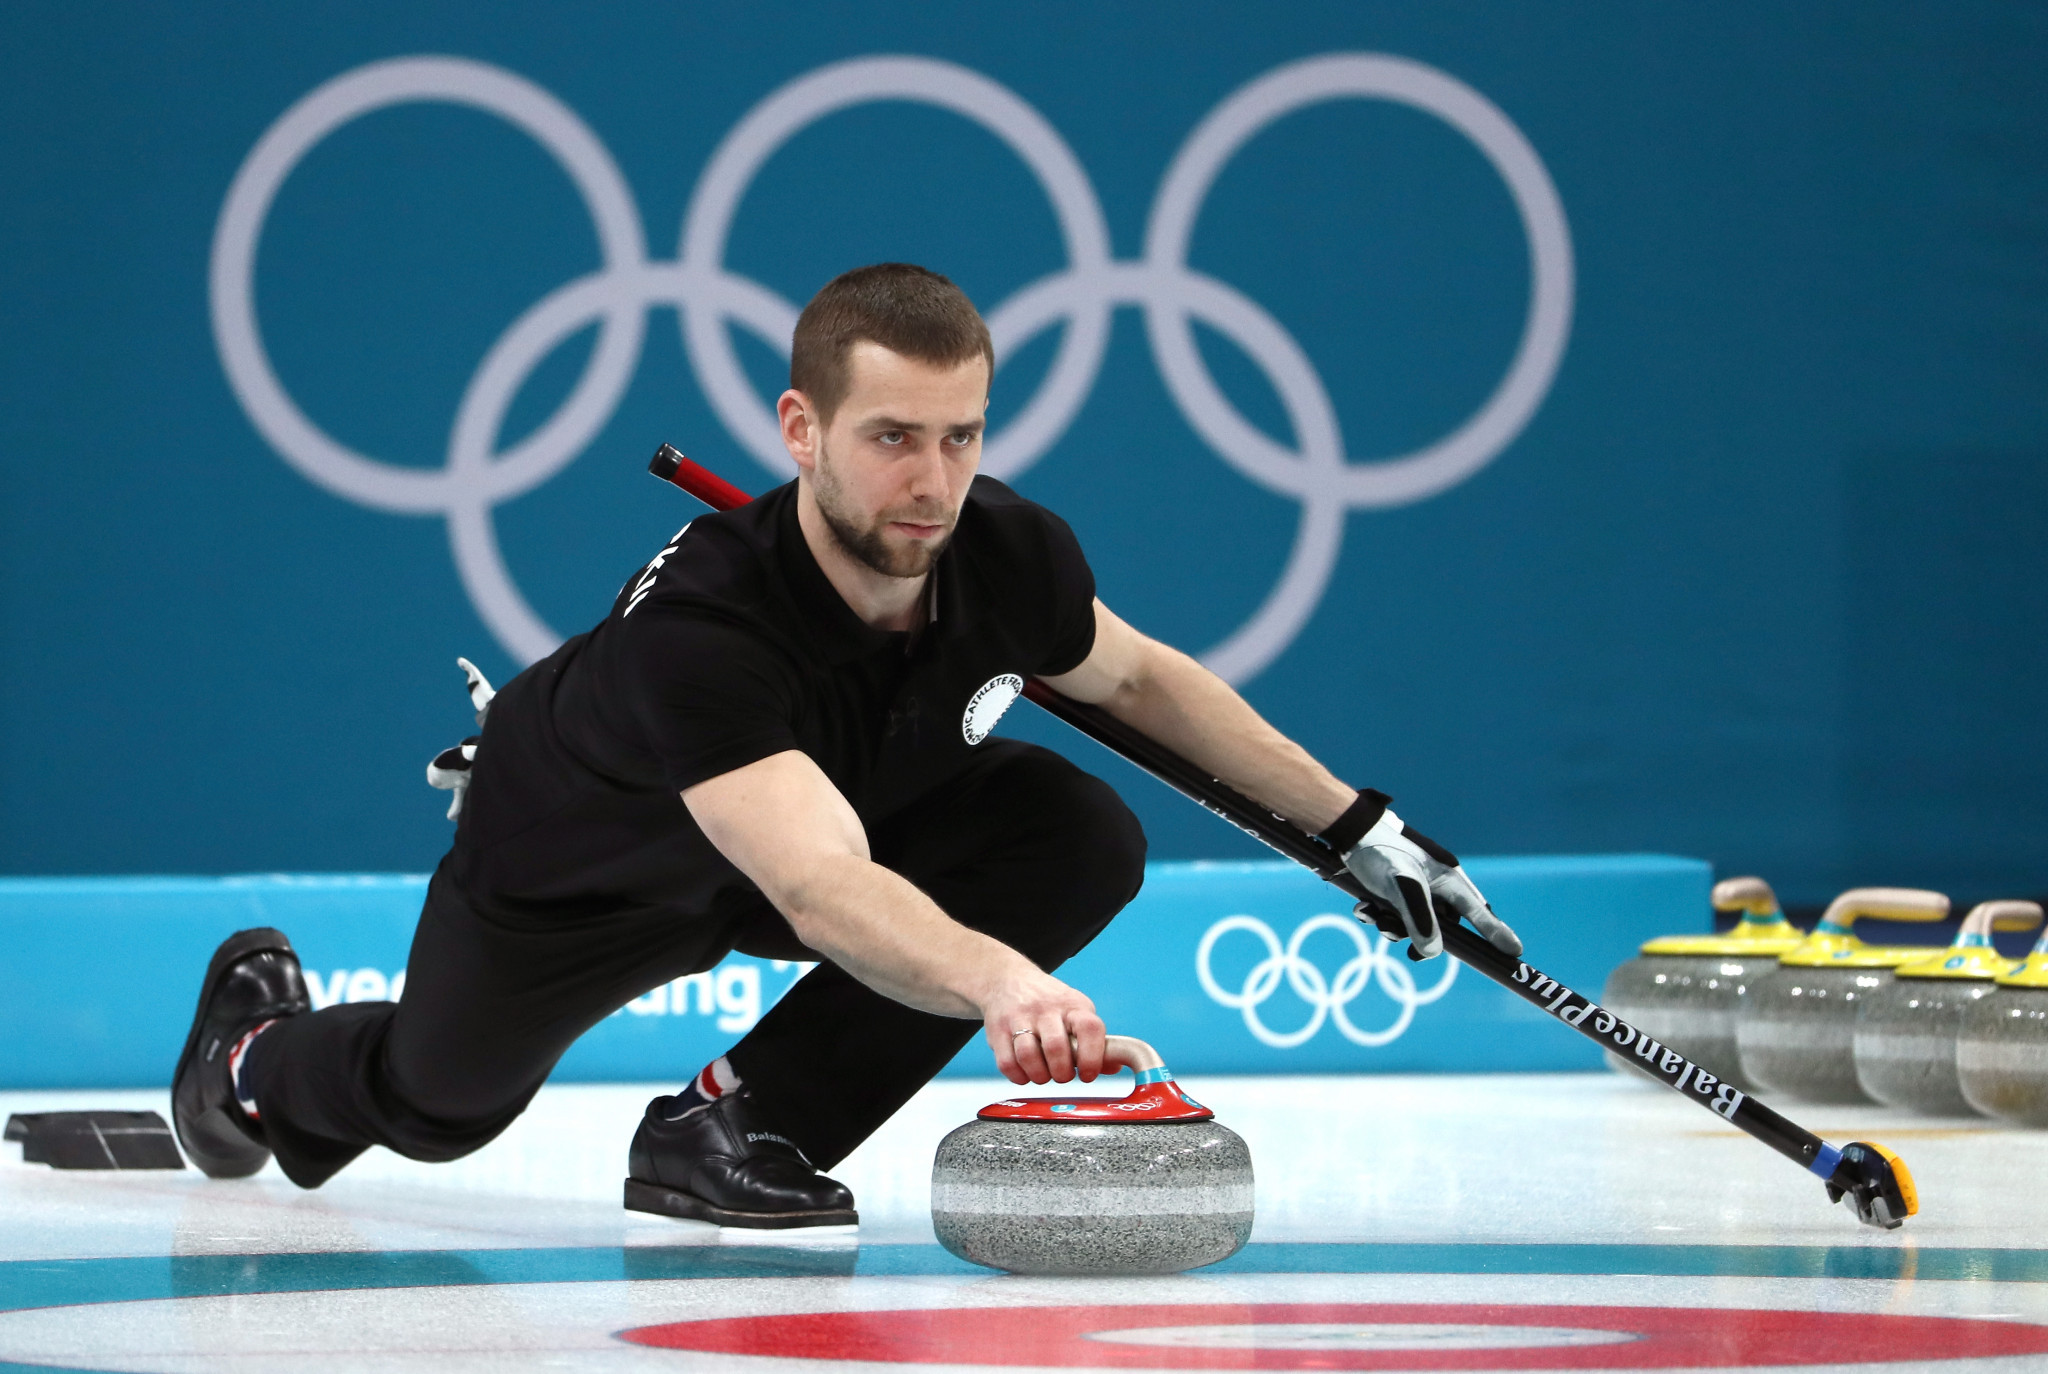 Russian curler formally charged with doping offence at Pyeongchang 2018 